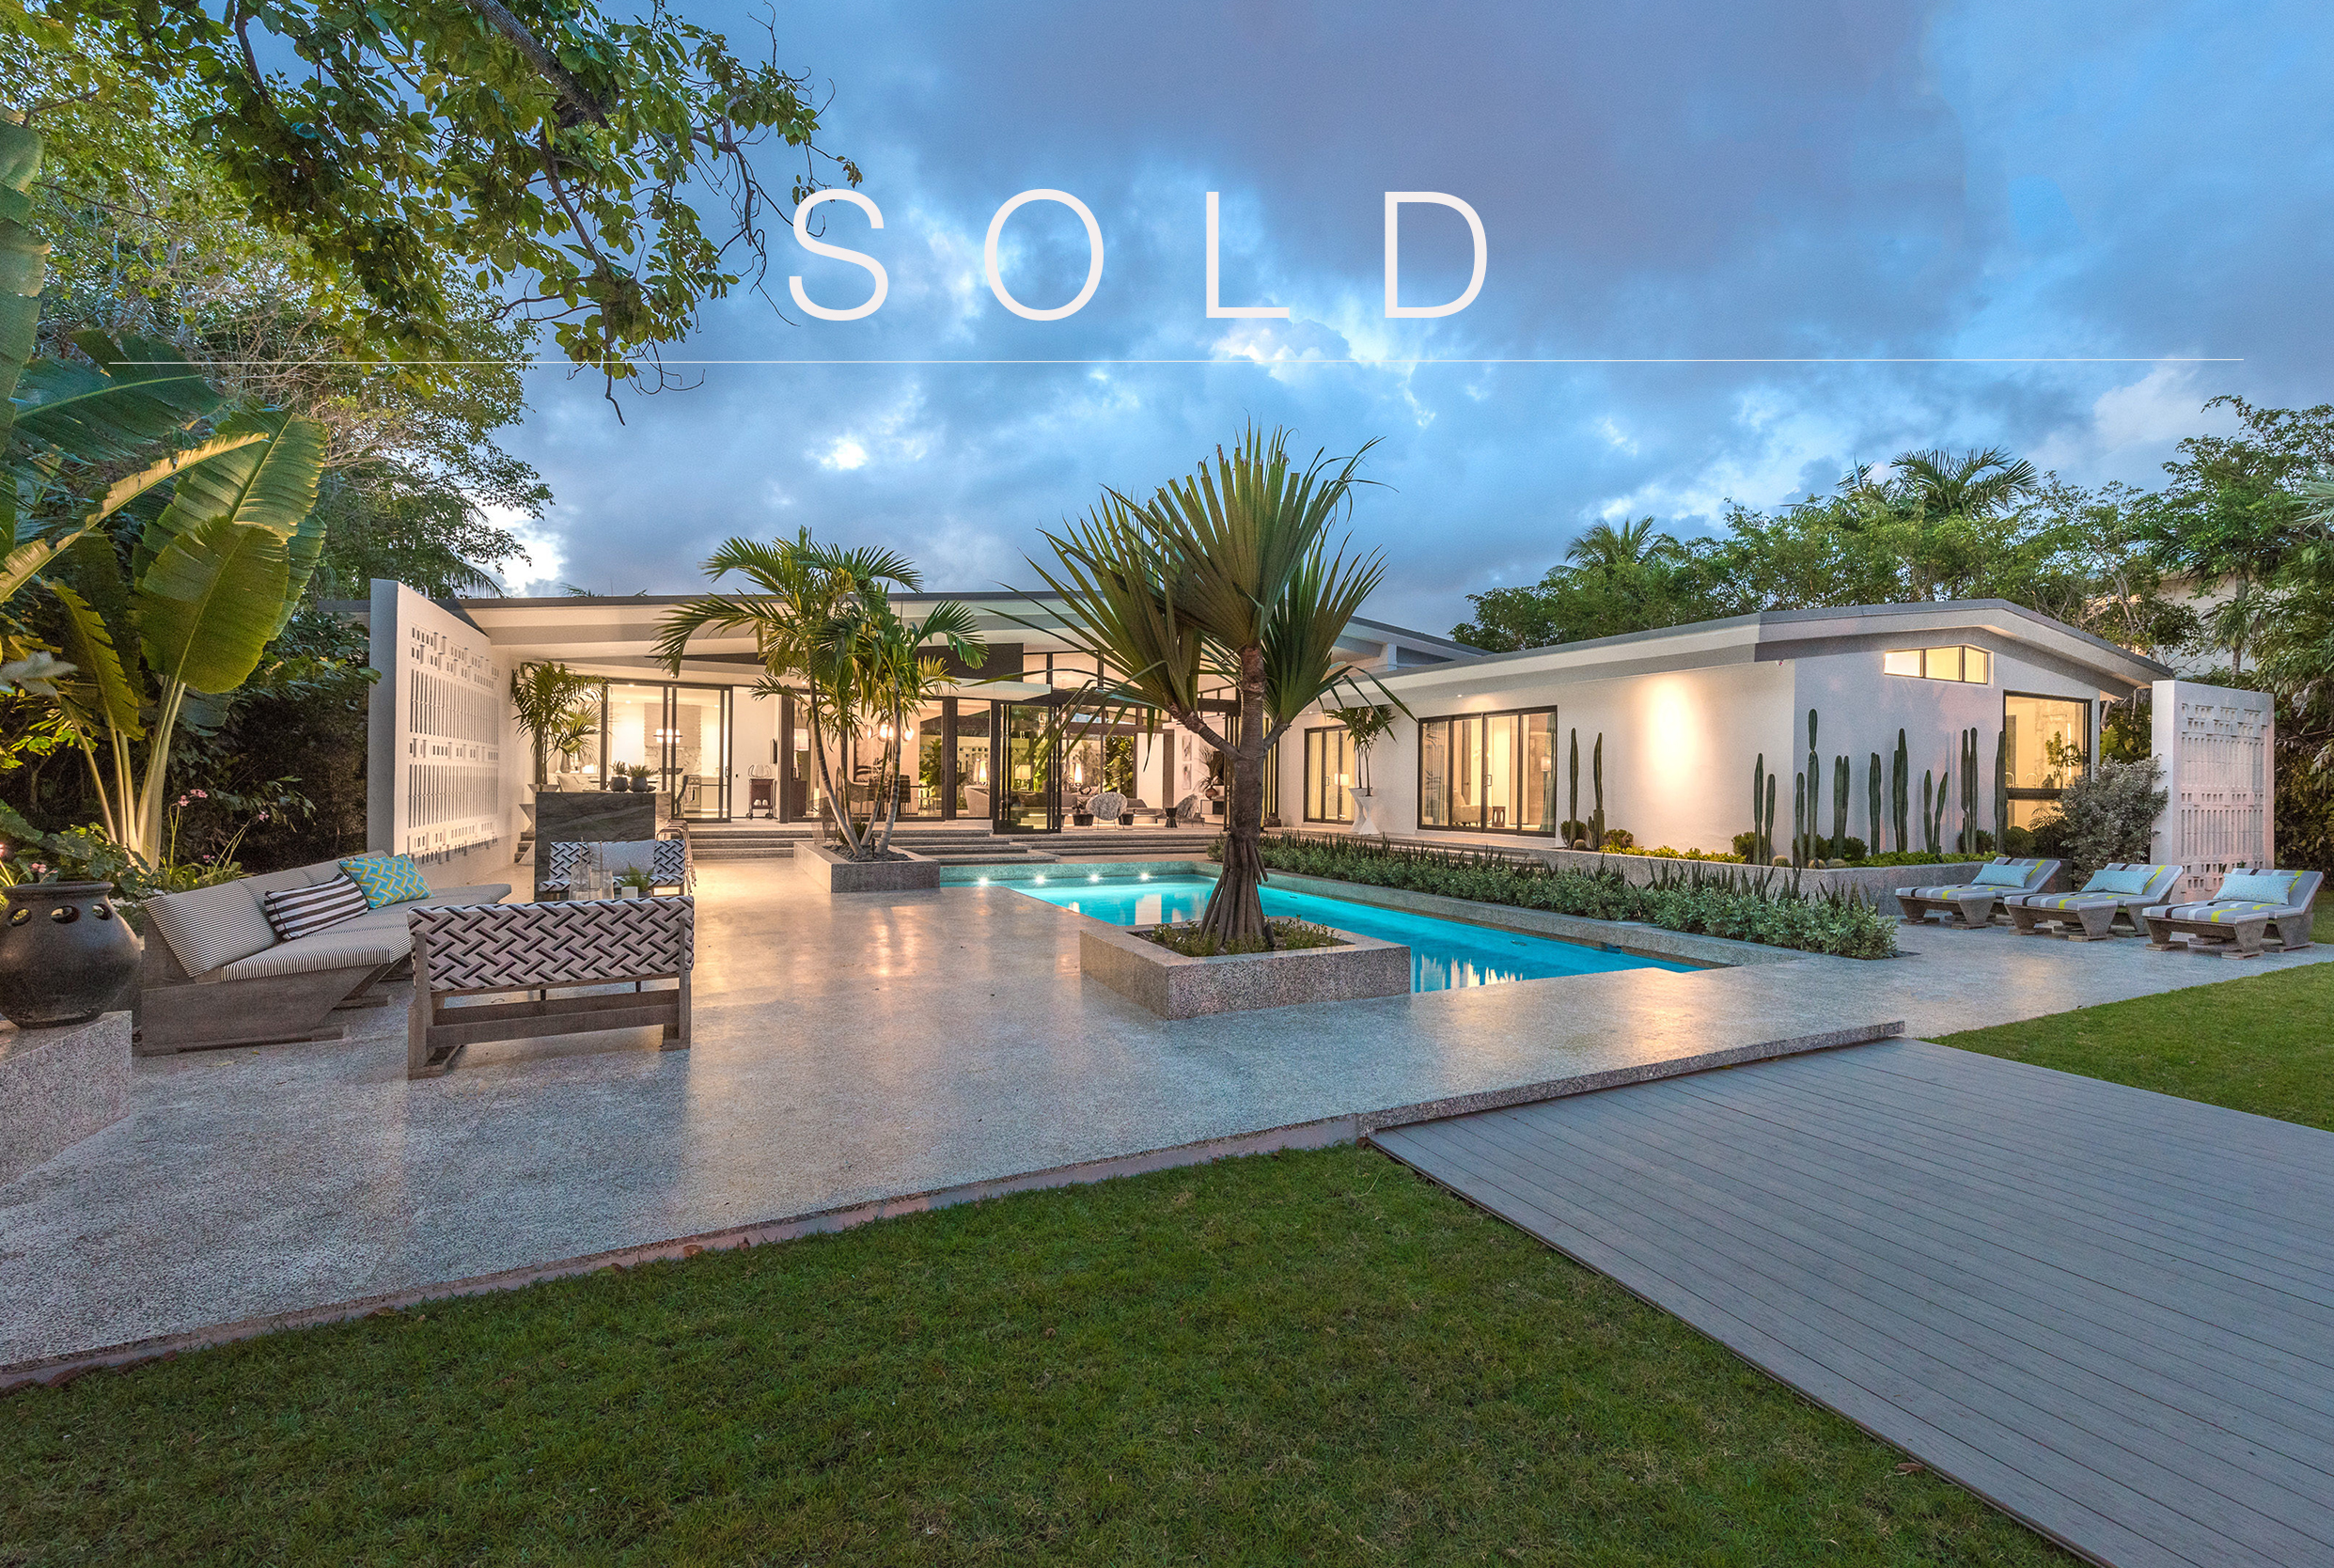 Sold Luxury Home by Top Producer Nelson Gonzalez 2979 Flamingo – Mid Century Modern Waterfront by renowned French architect Jean-Louis Deniot